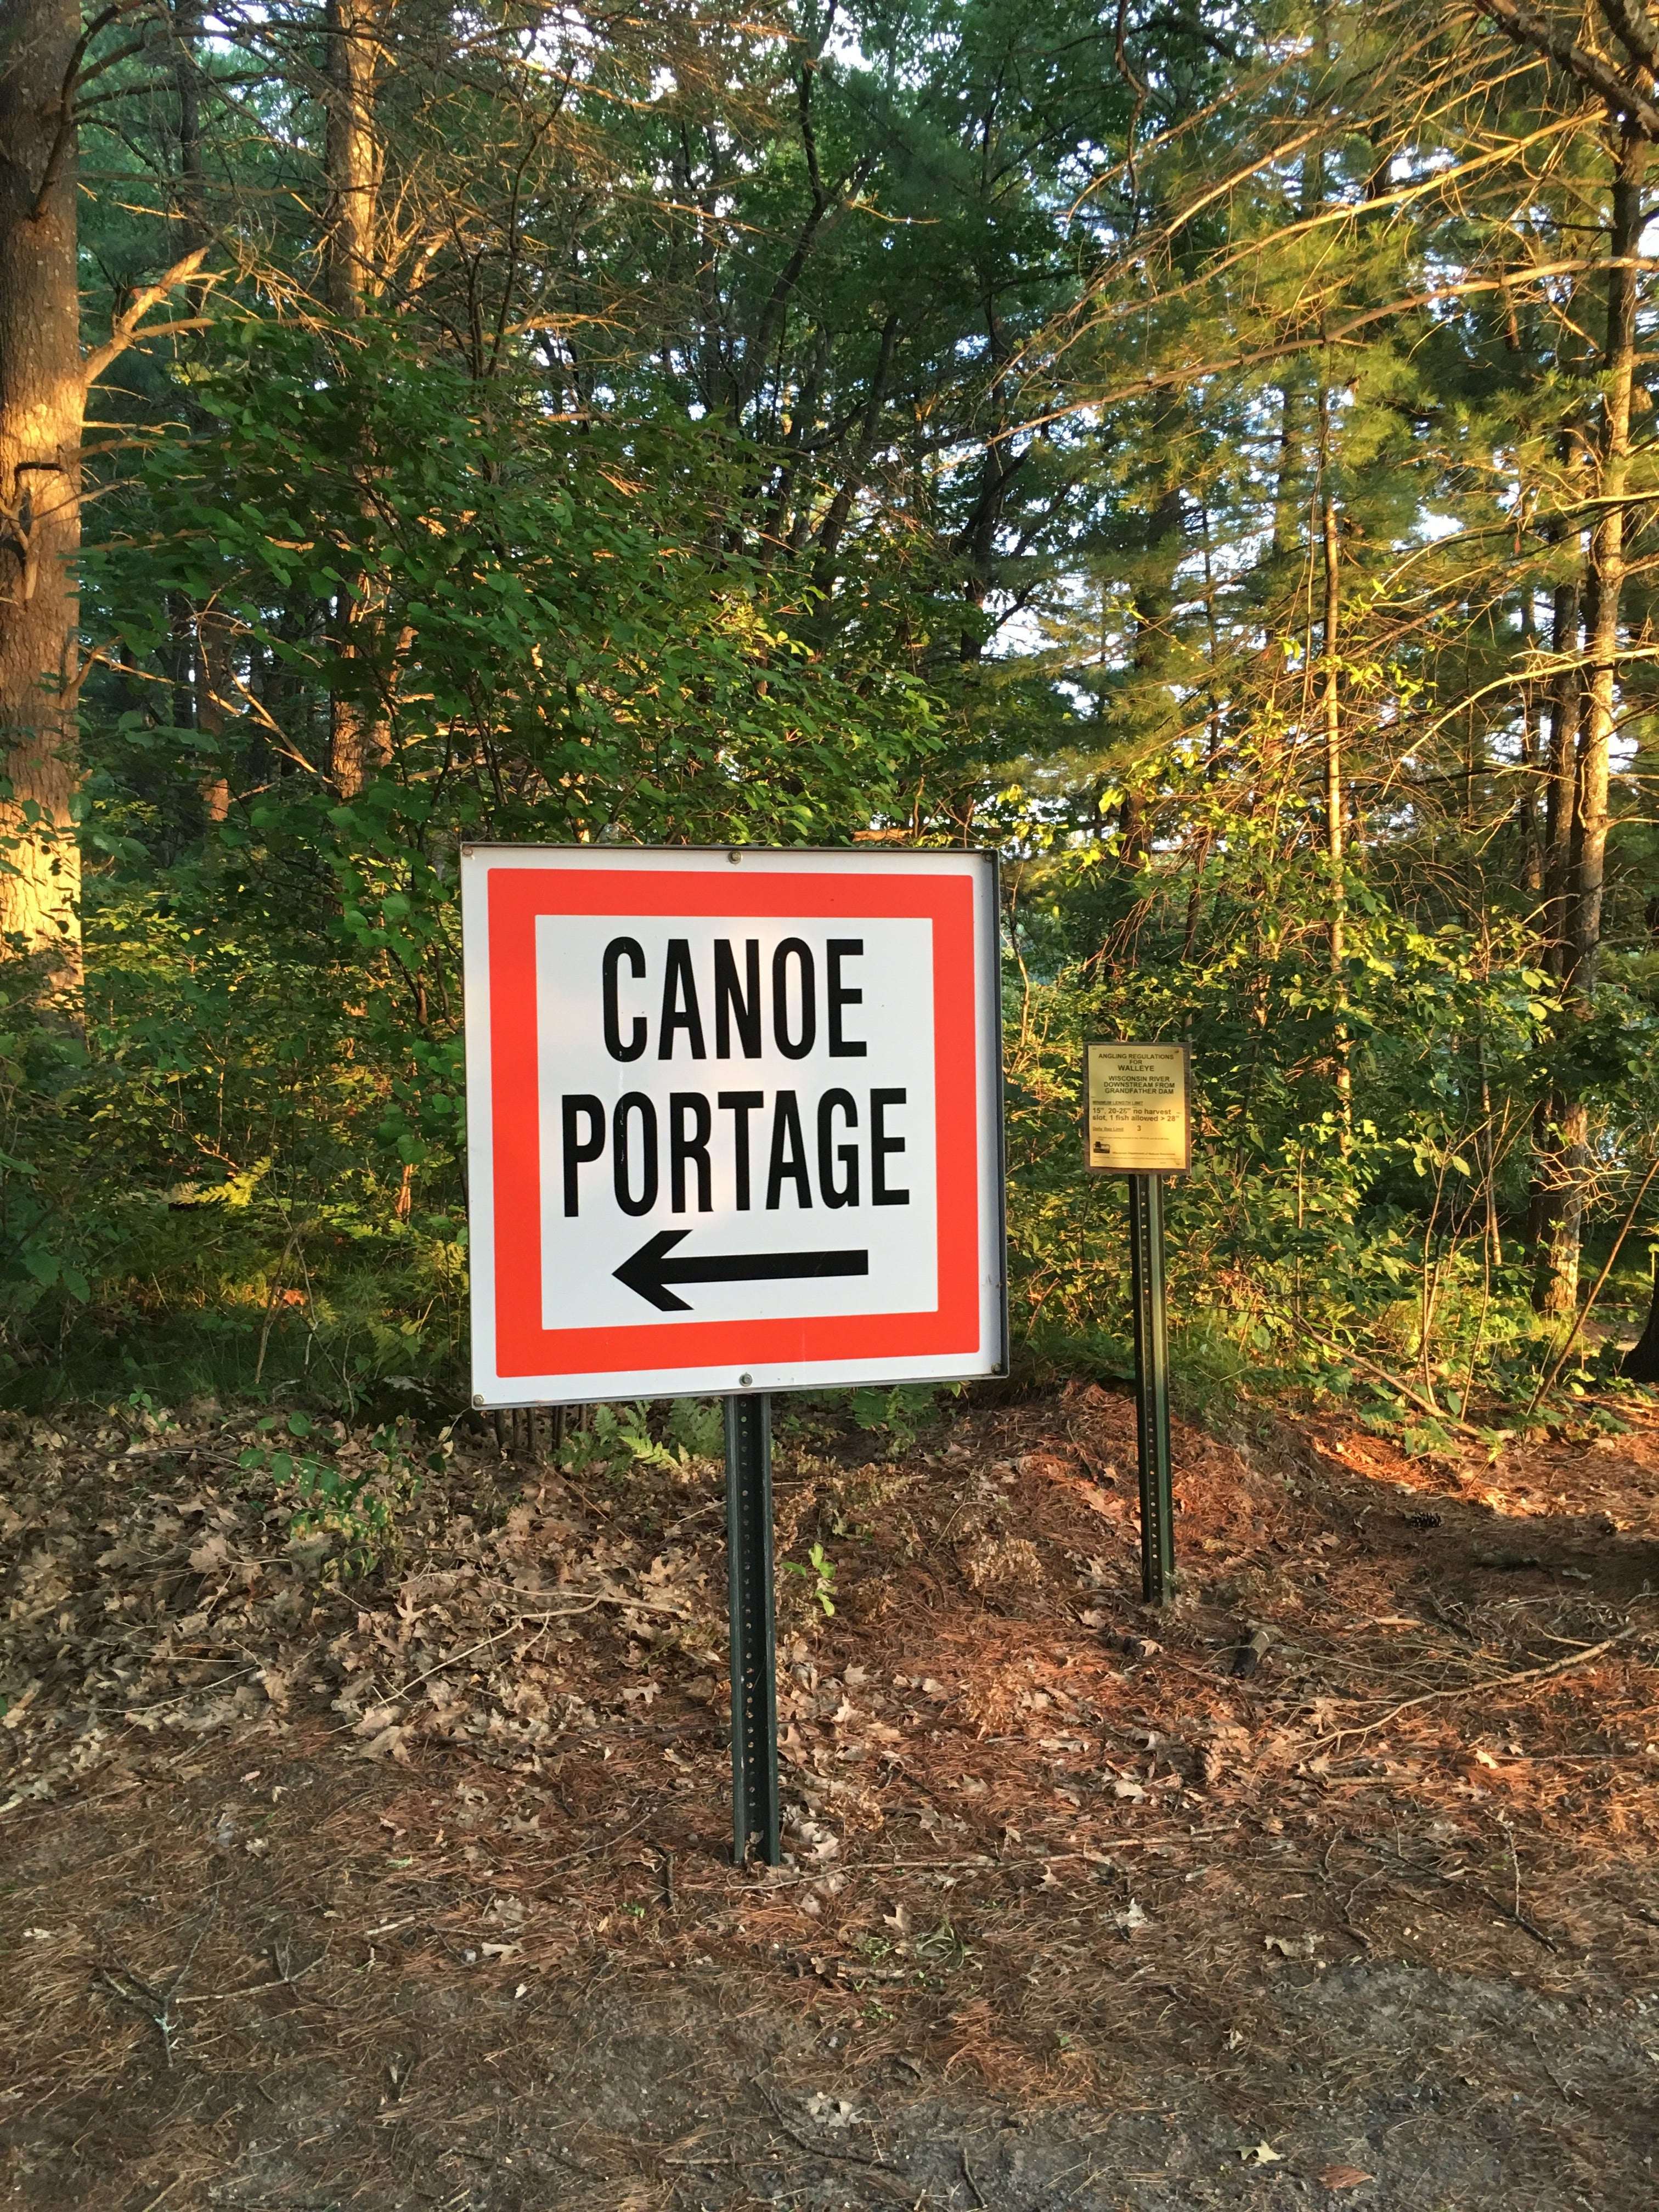 It't nice that there is a well marked portage trail